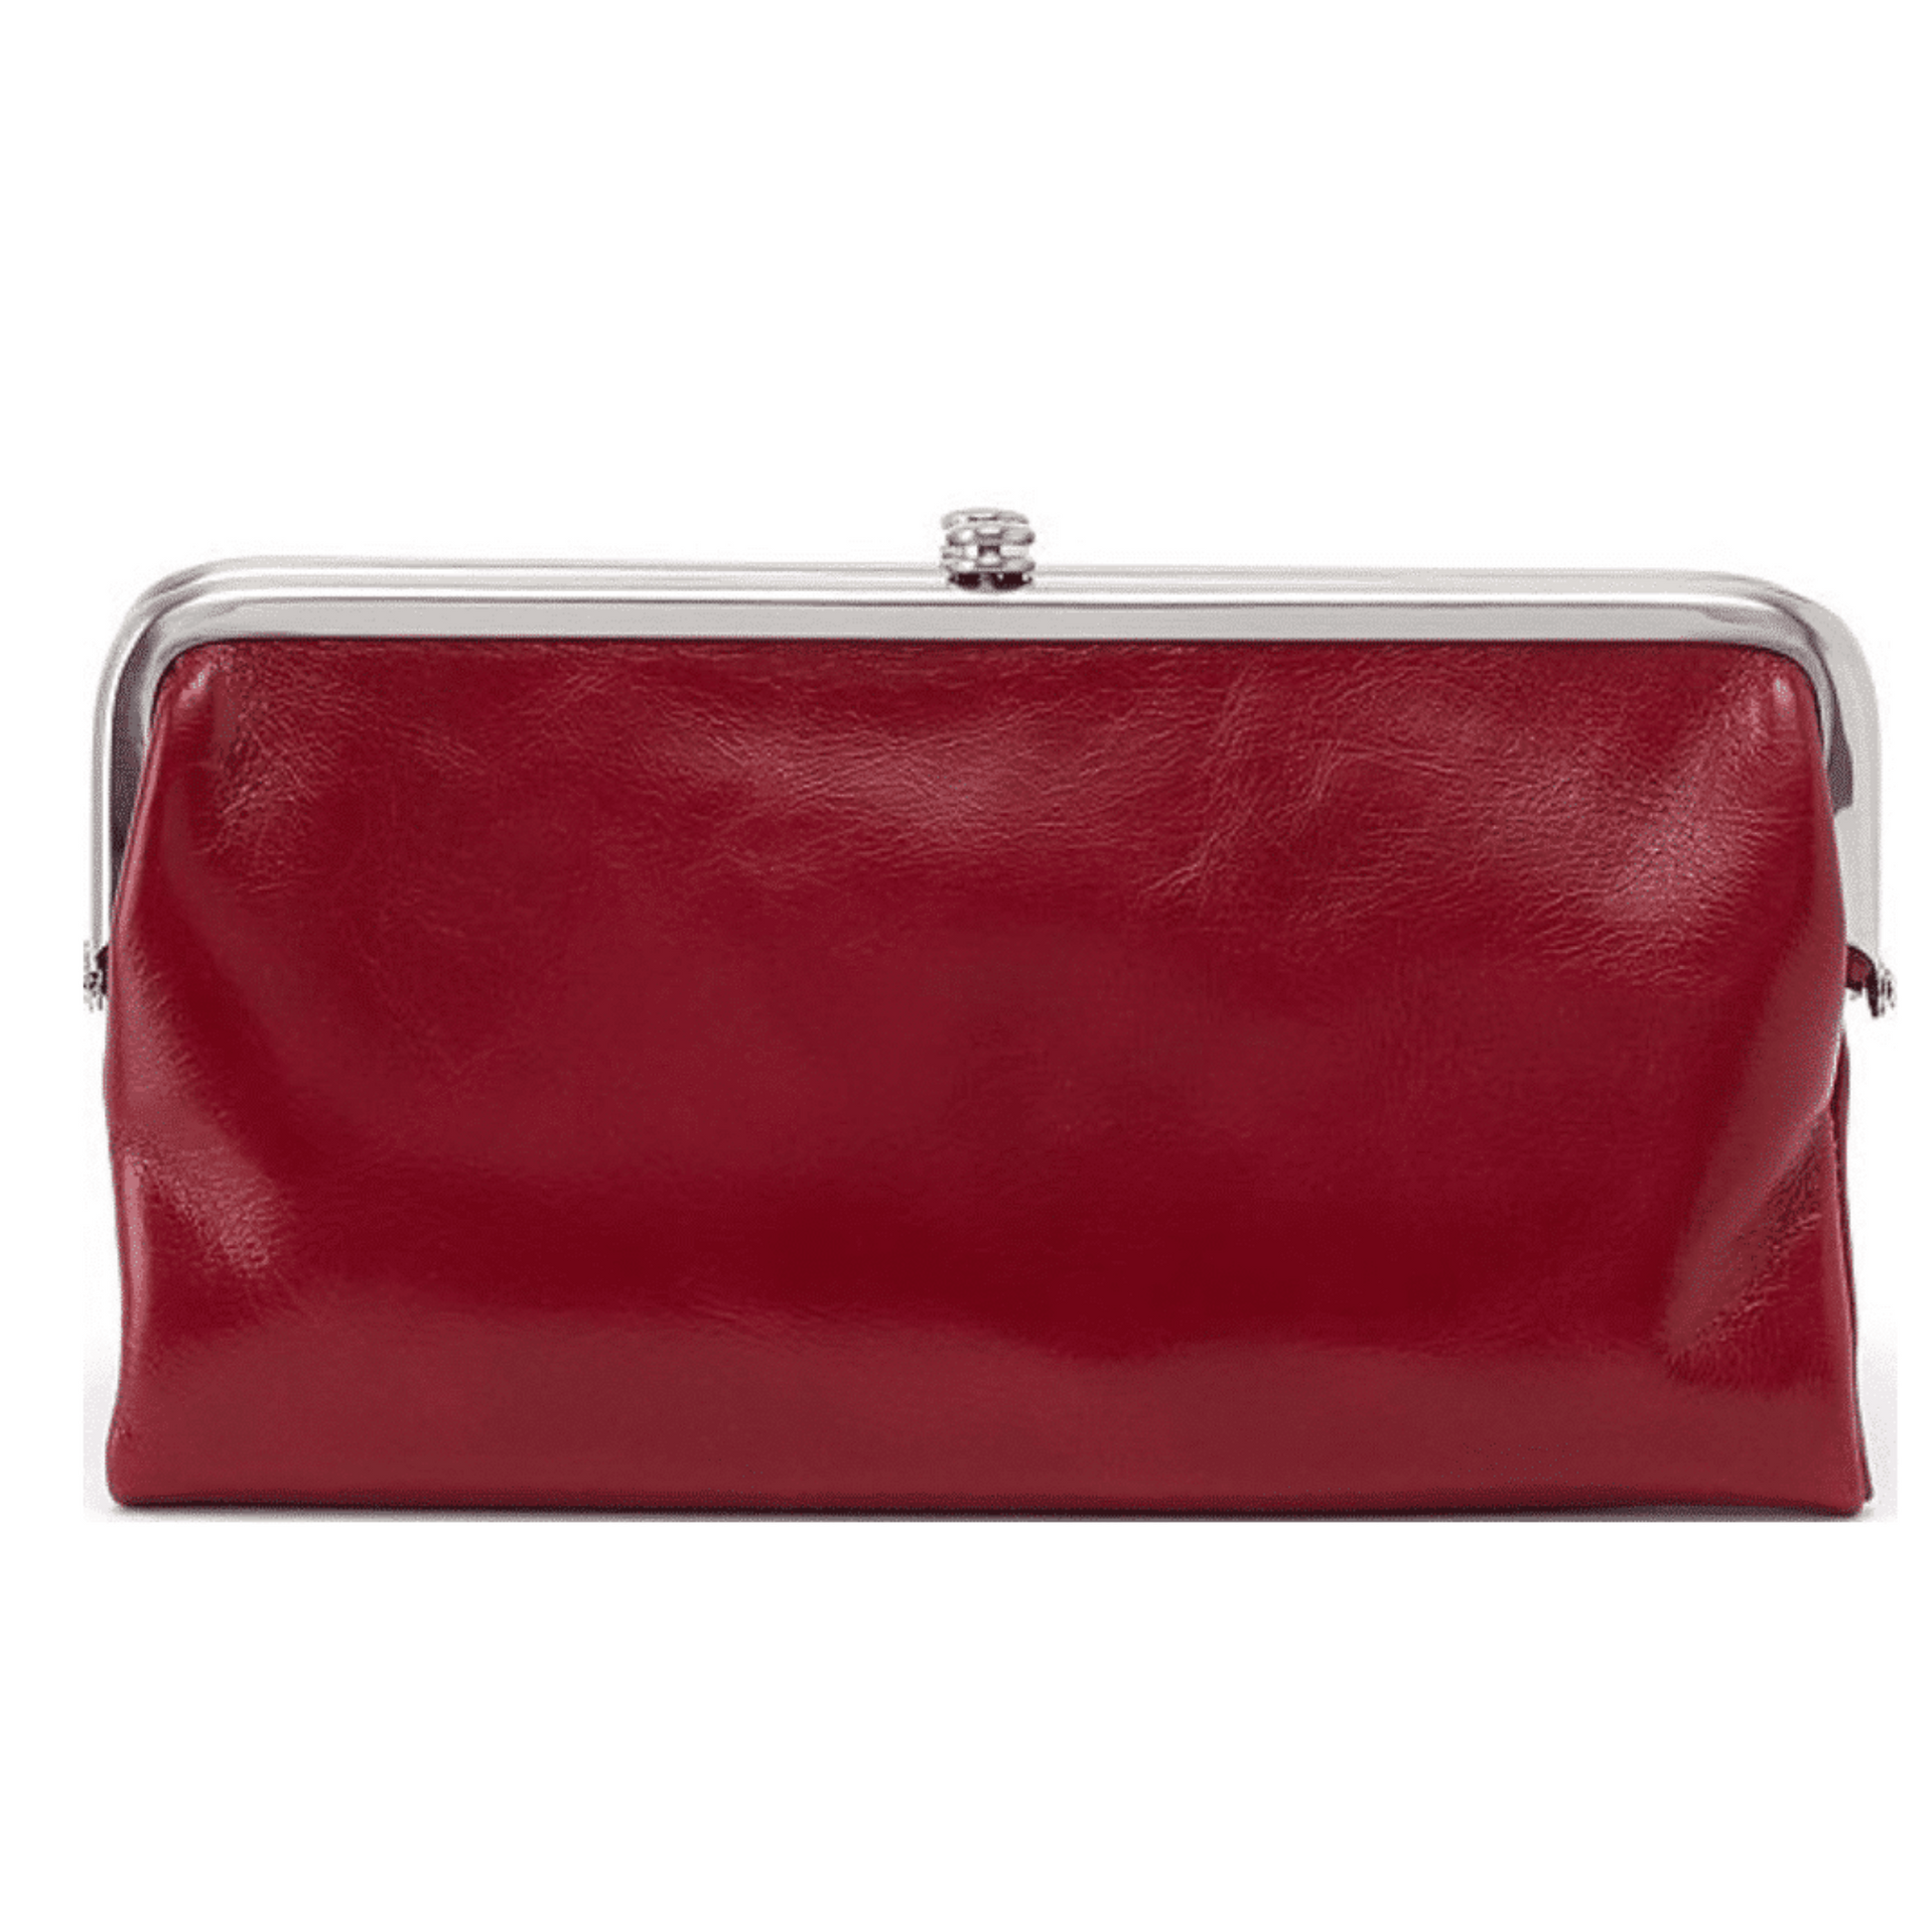 A leather wallet in the colour cardinal.